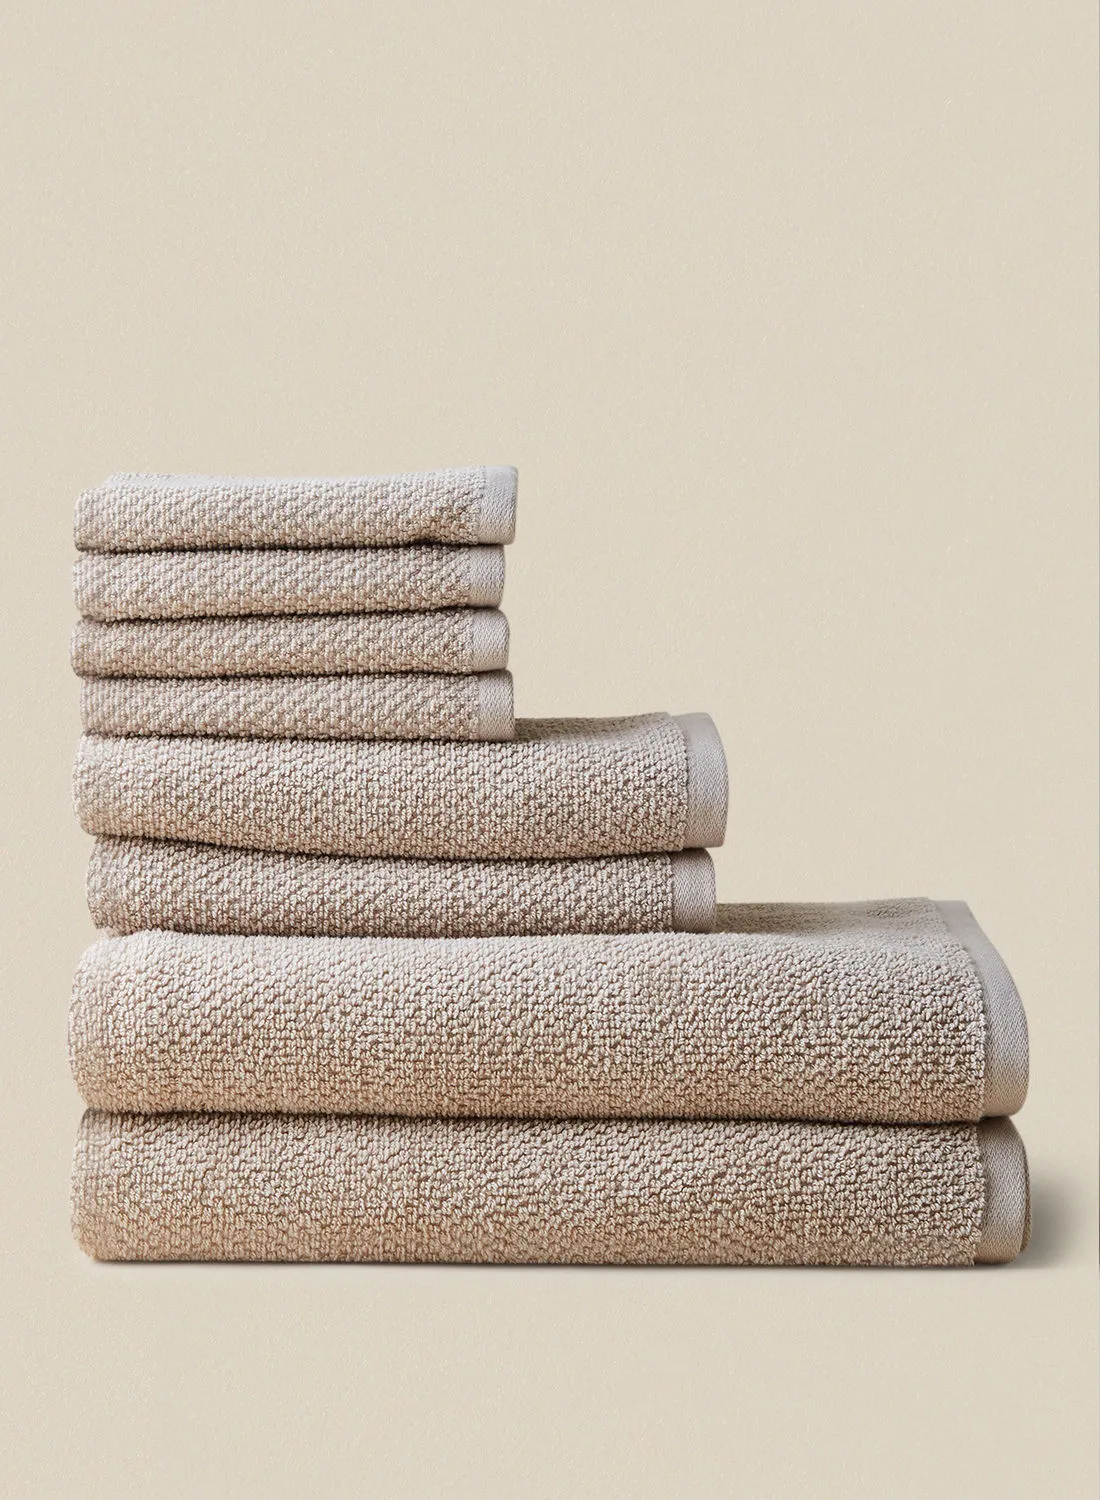 noon east 8 Piece Bathroom Towel Set - 500 GSM 100% Organic Cotton - 2 Hand Towel - 4 Face Towel - 2 Bath Towel - Linen Color - Highly Absorbent - Fast Dry